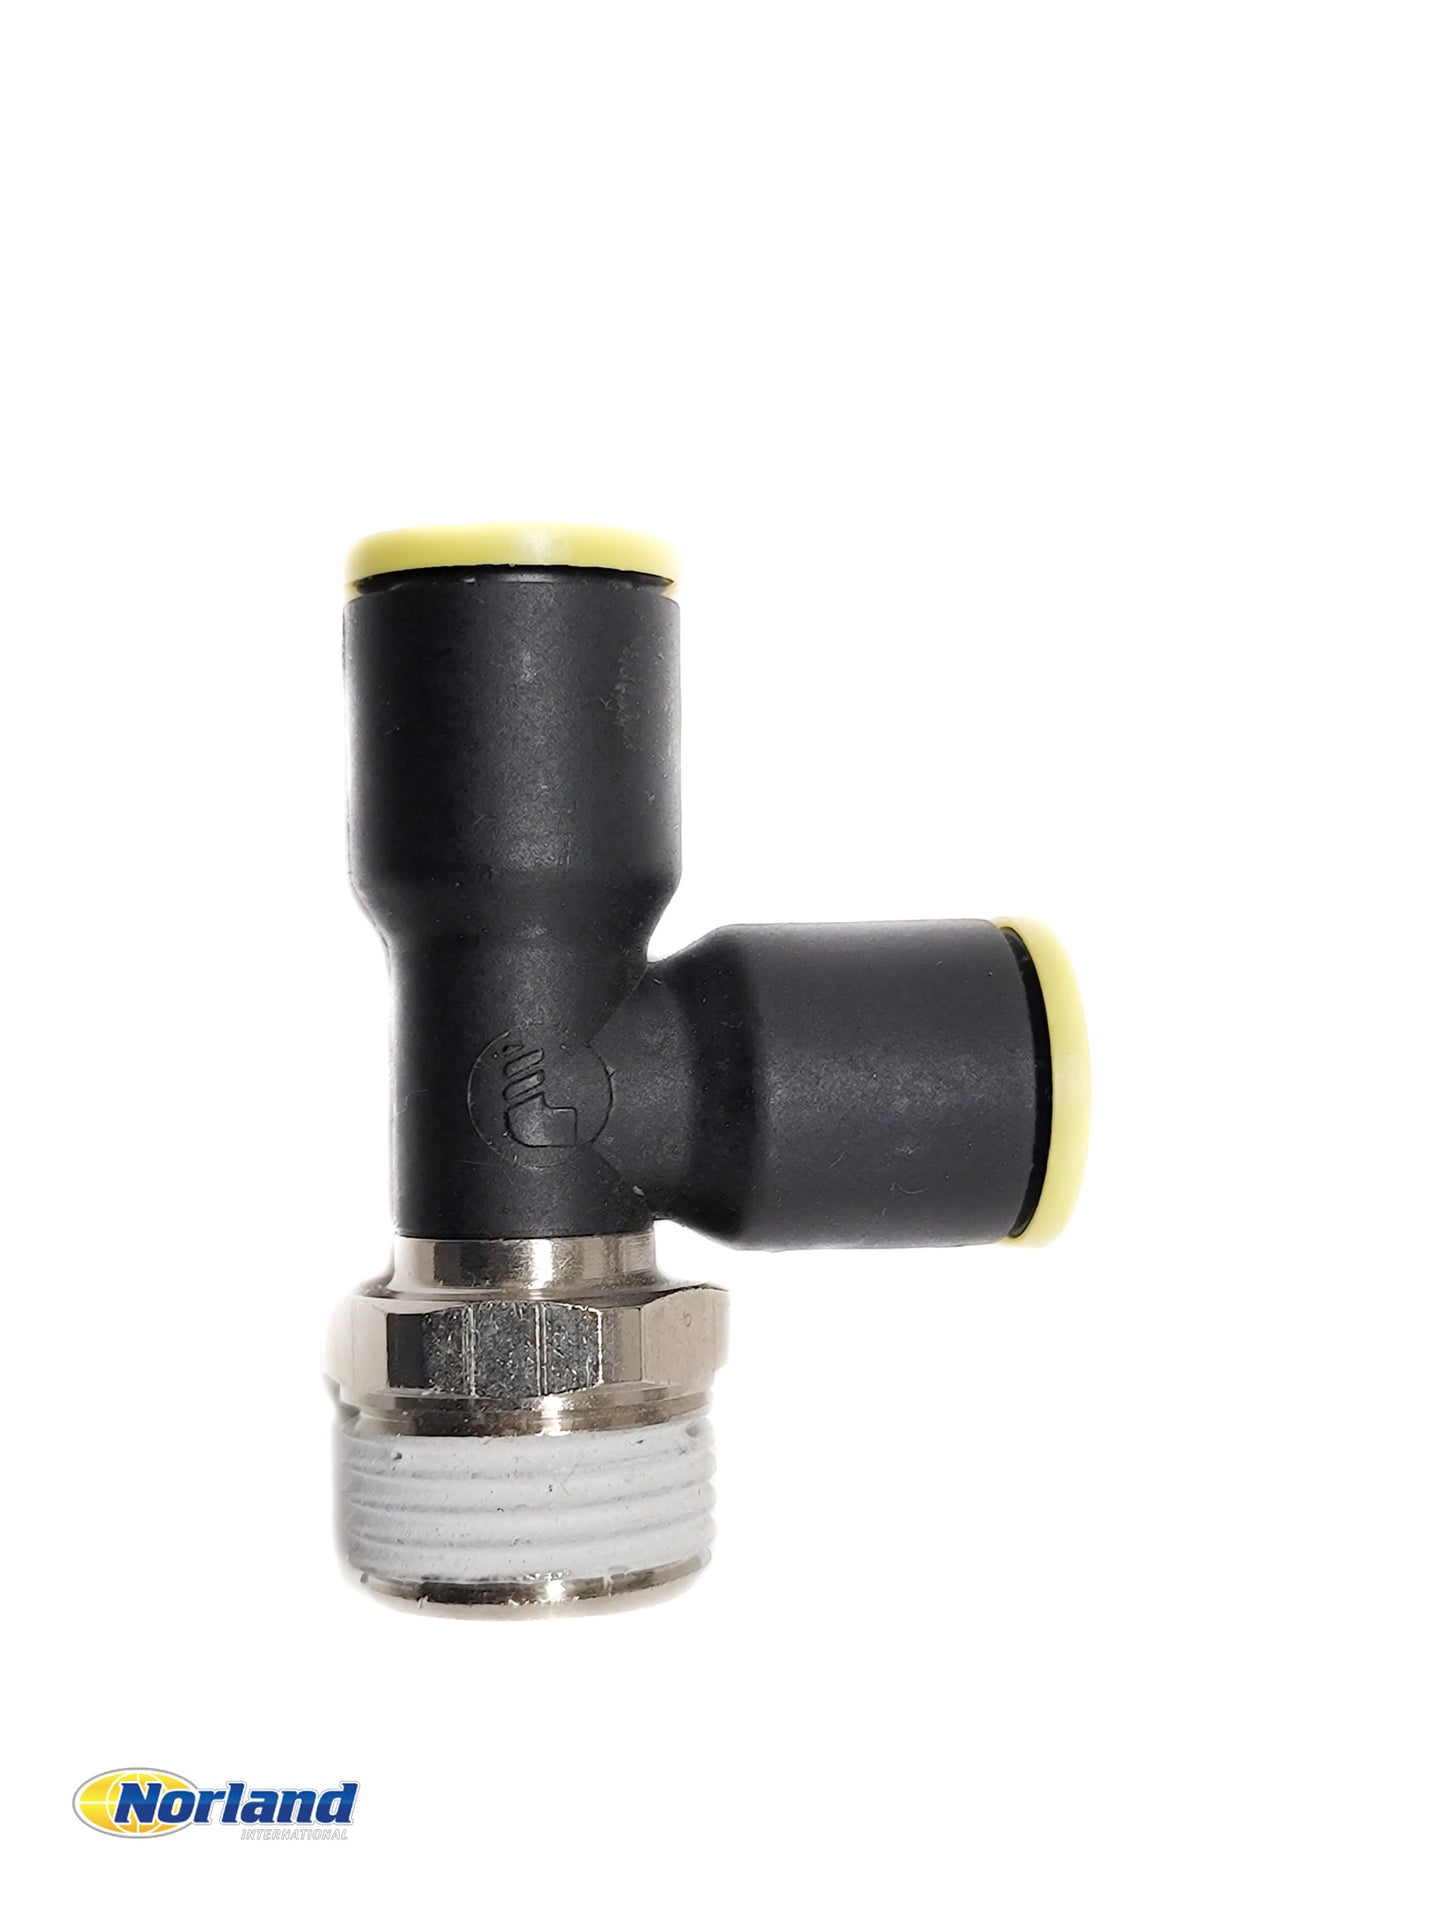 1/2" MBSPT x 12mm x 12mm Push-To-Connect Adapter Tee